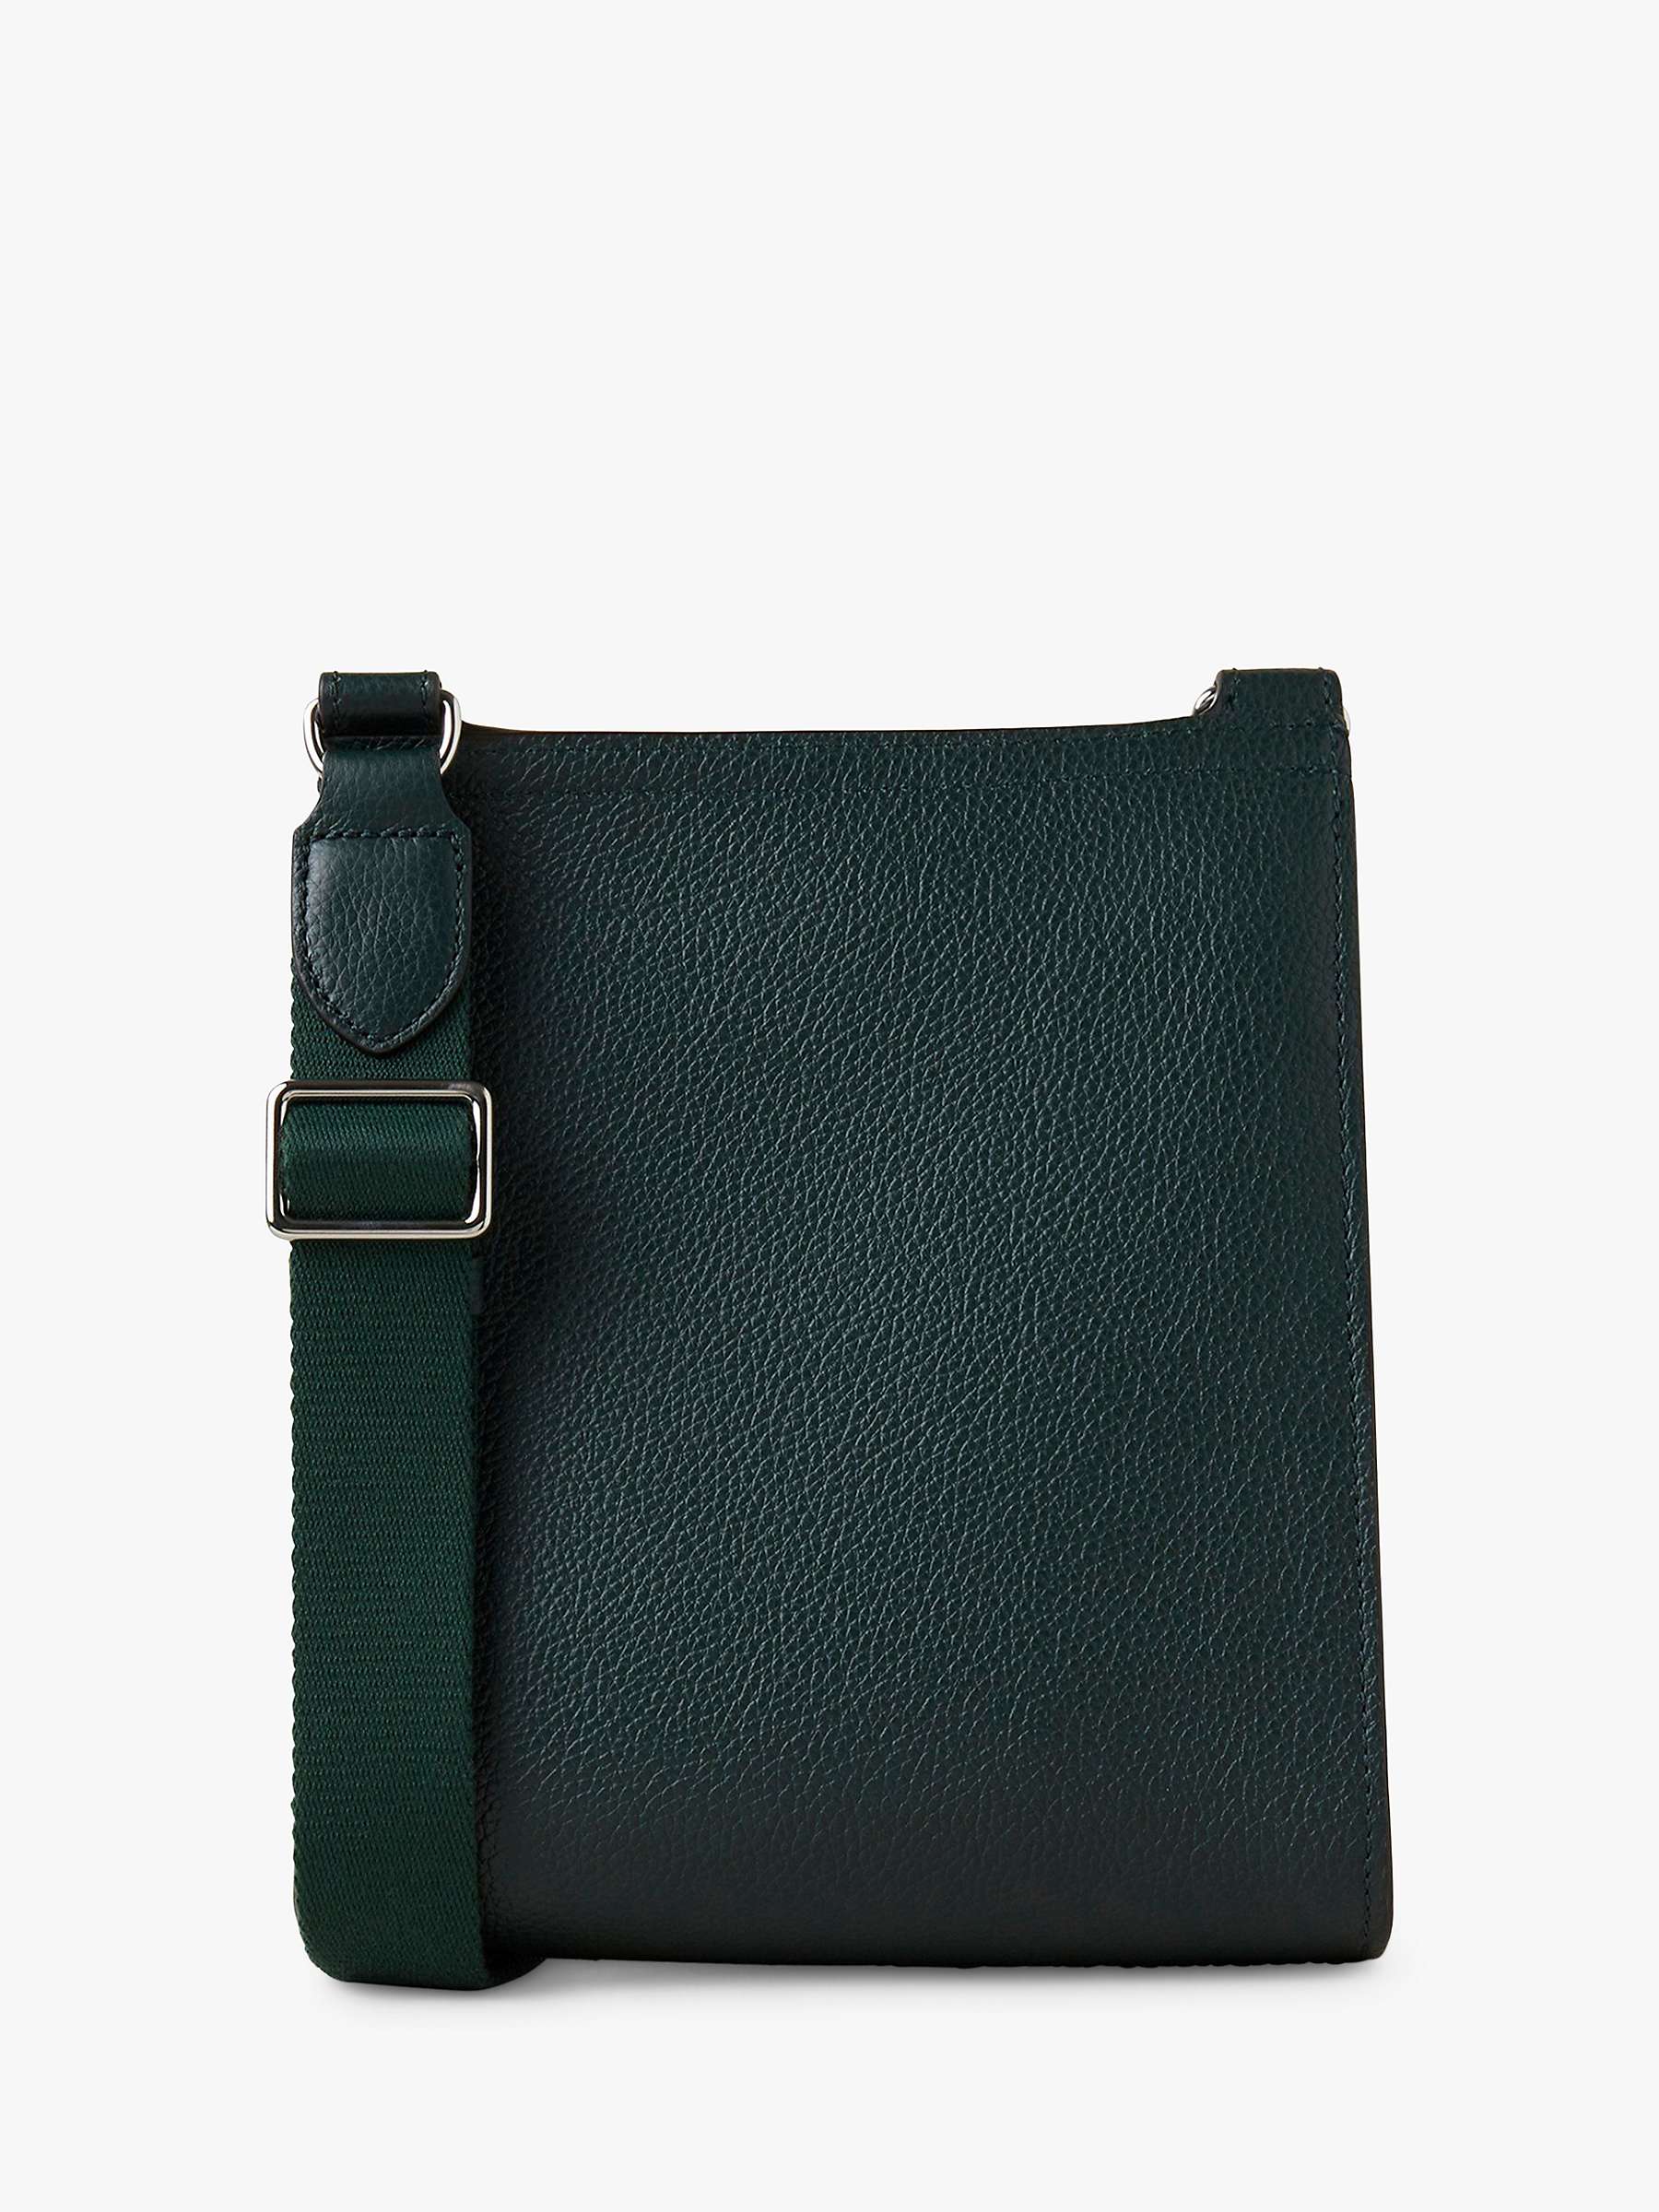 Buy Mulberry Small Antony Small Classic Grain Leather Messenger Bag Online at johnlewis.com